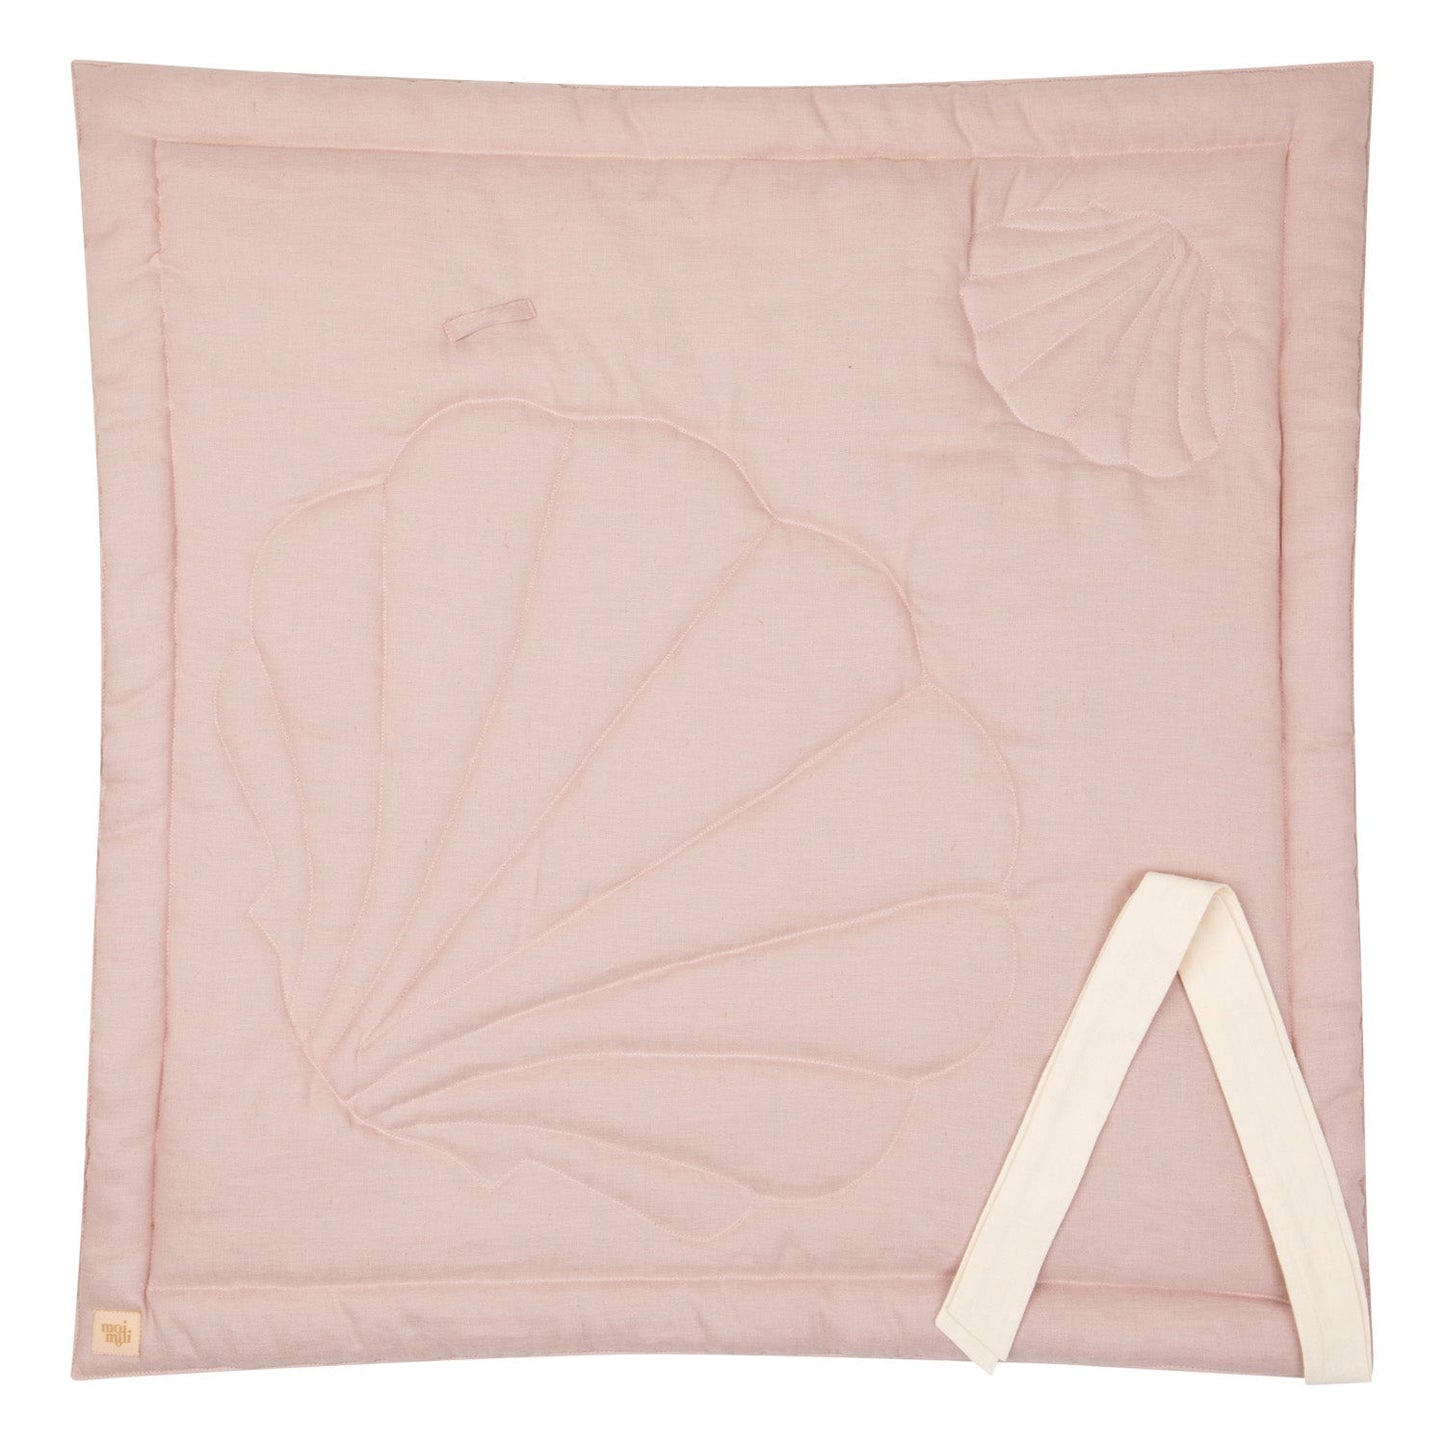 "Powder Pink" Linen Shell Baby Horn by Moi Mili